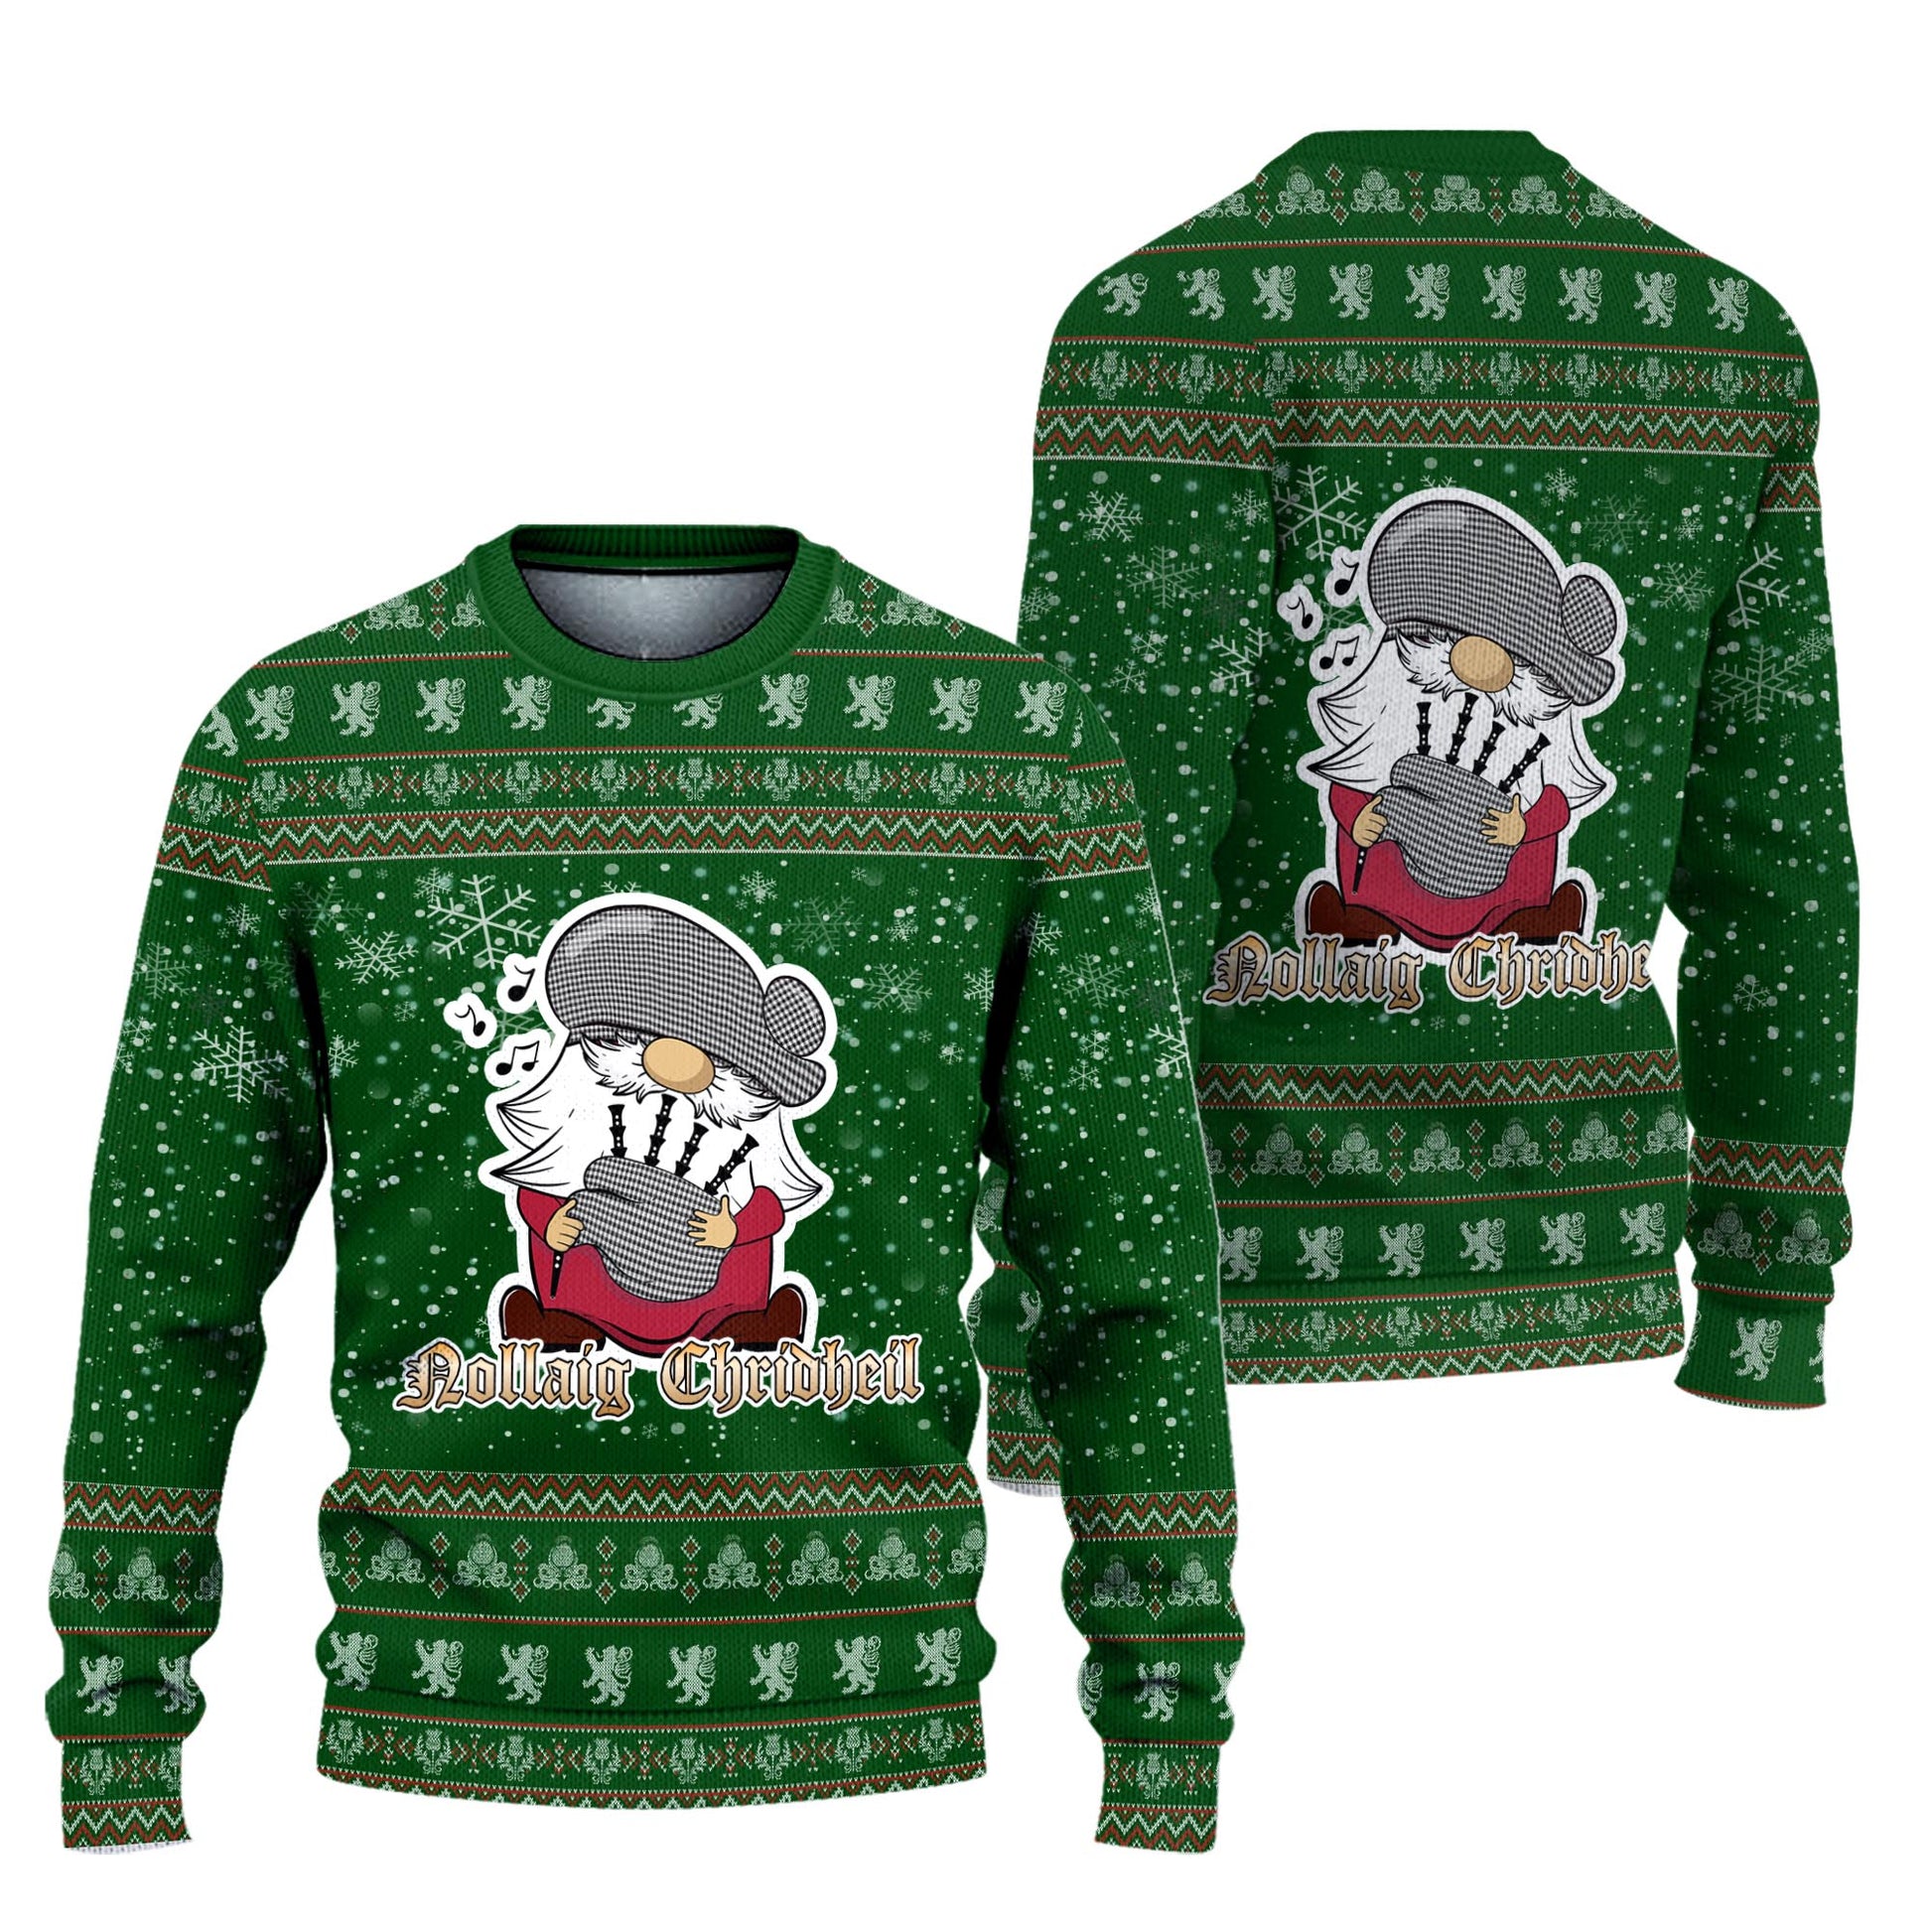 Shepherd Clan Christmas Family Knitted Sweater with Funny Gnome Playing Bagpipes Unisex Green - Tartanvibesclothing